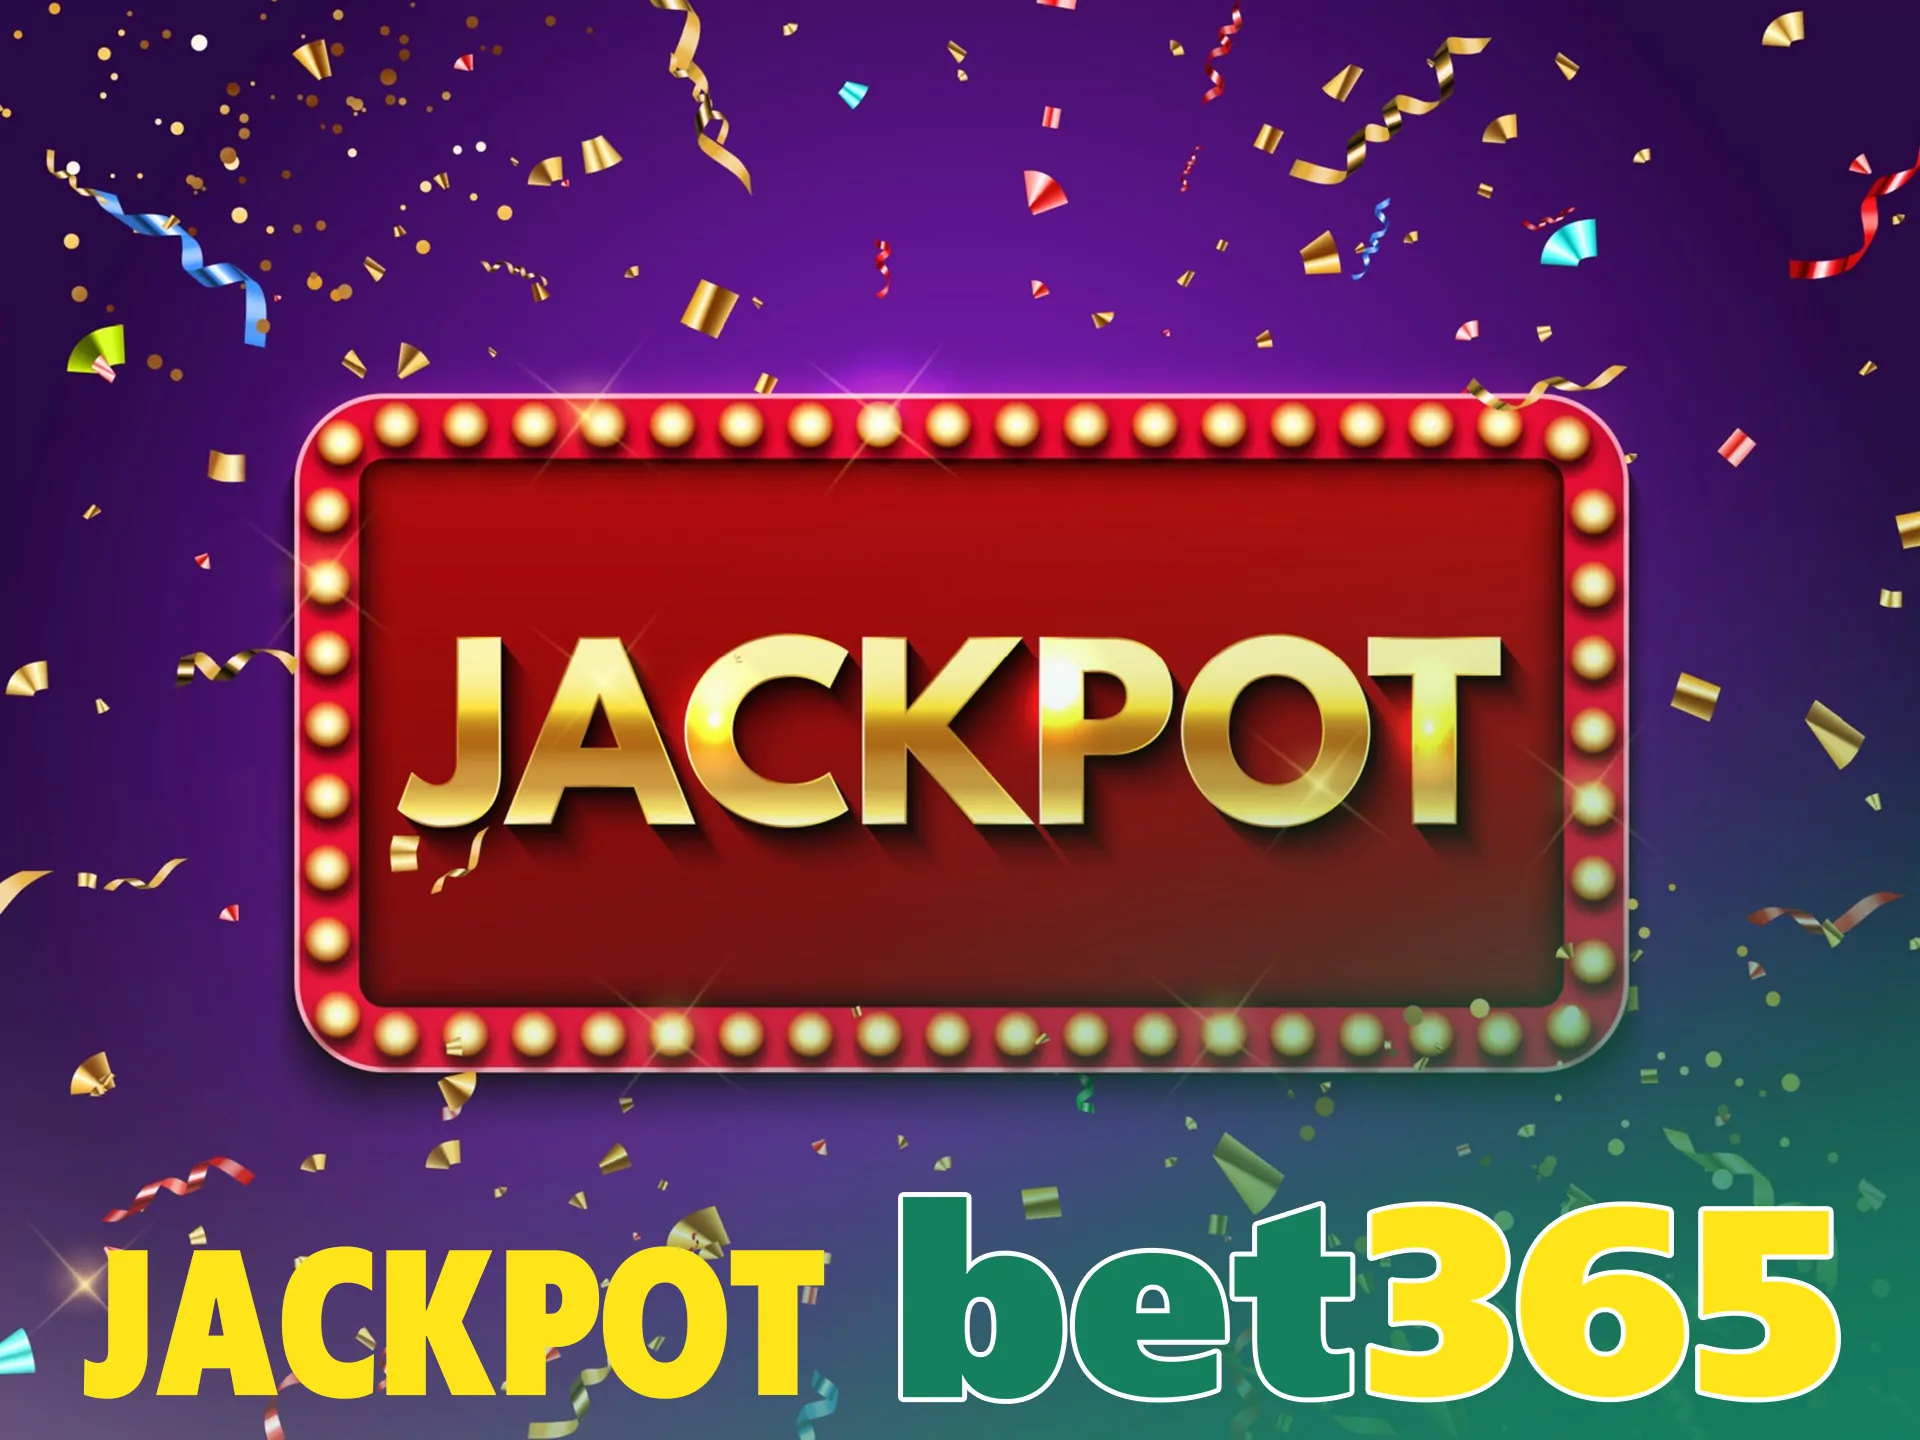 Win biggest amount of money playing jackpot games.